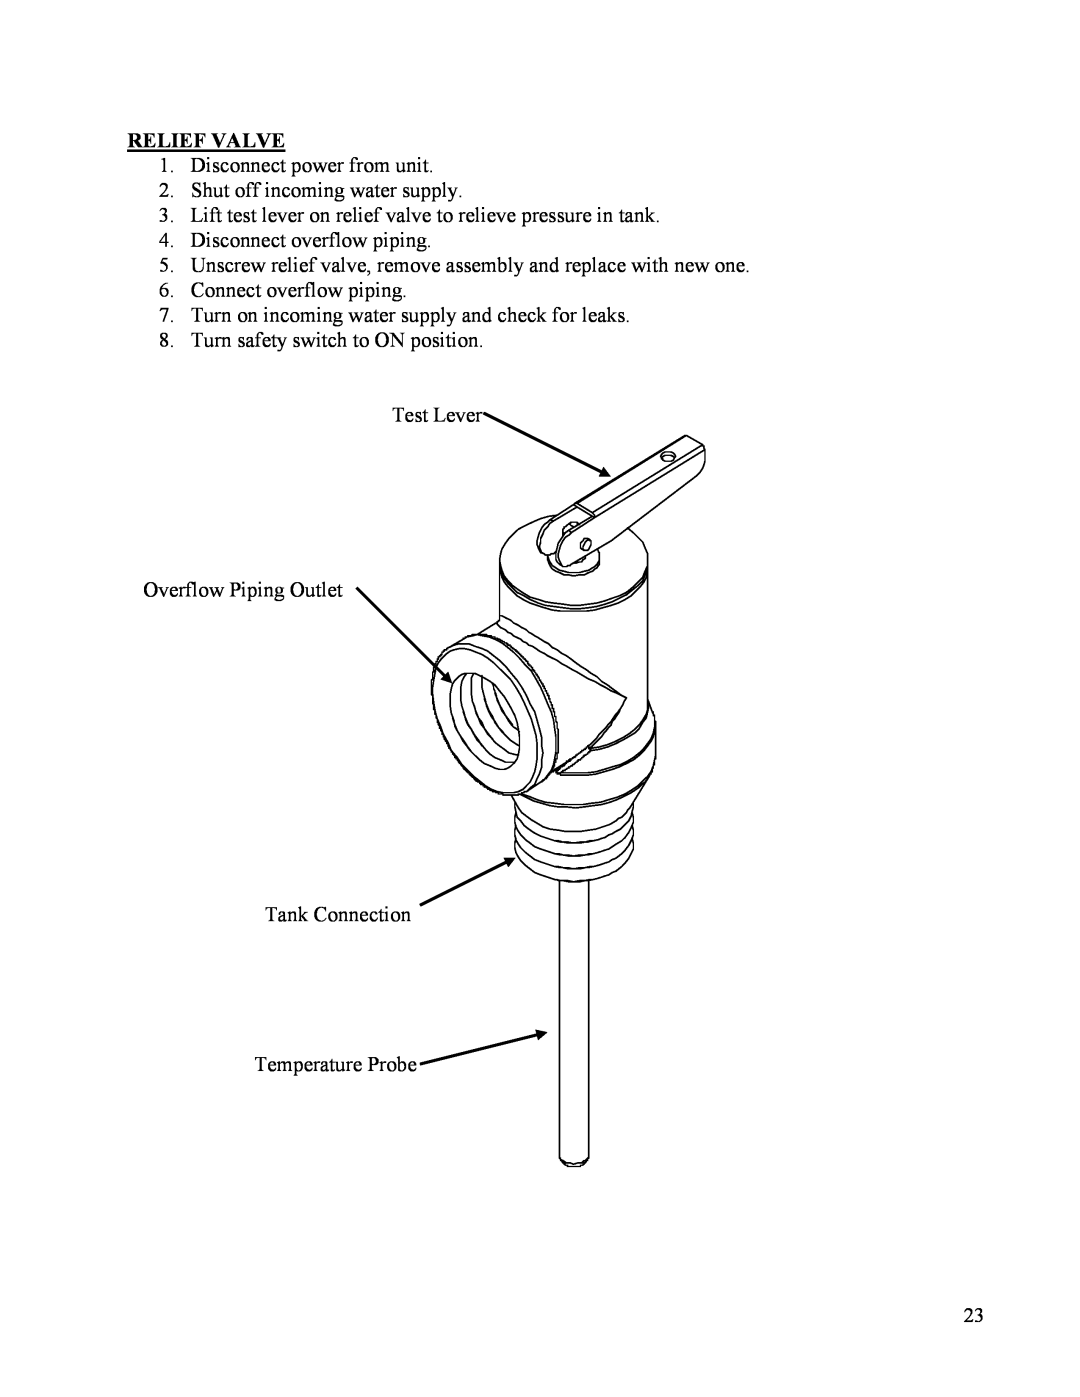 Hubbell Electric Heater Company B manual Relief Valve 